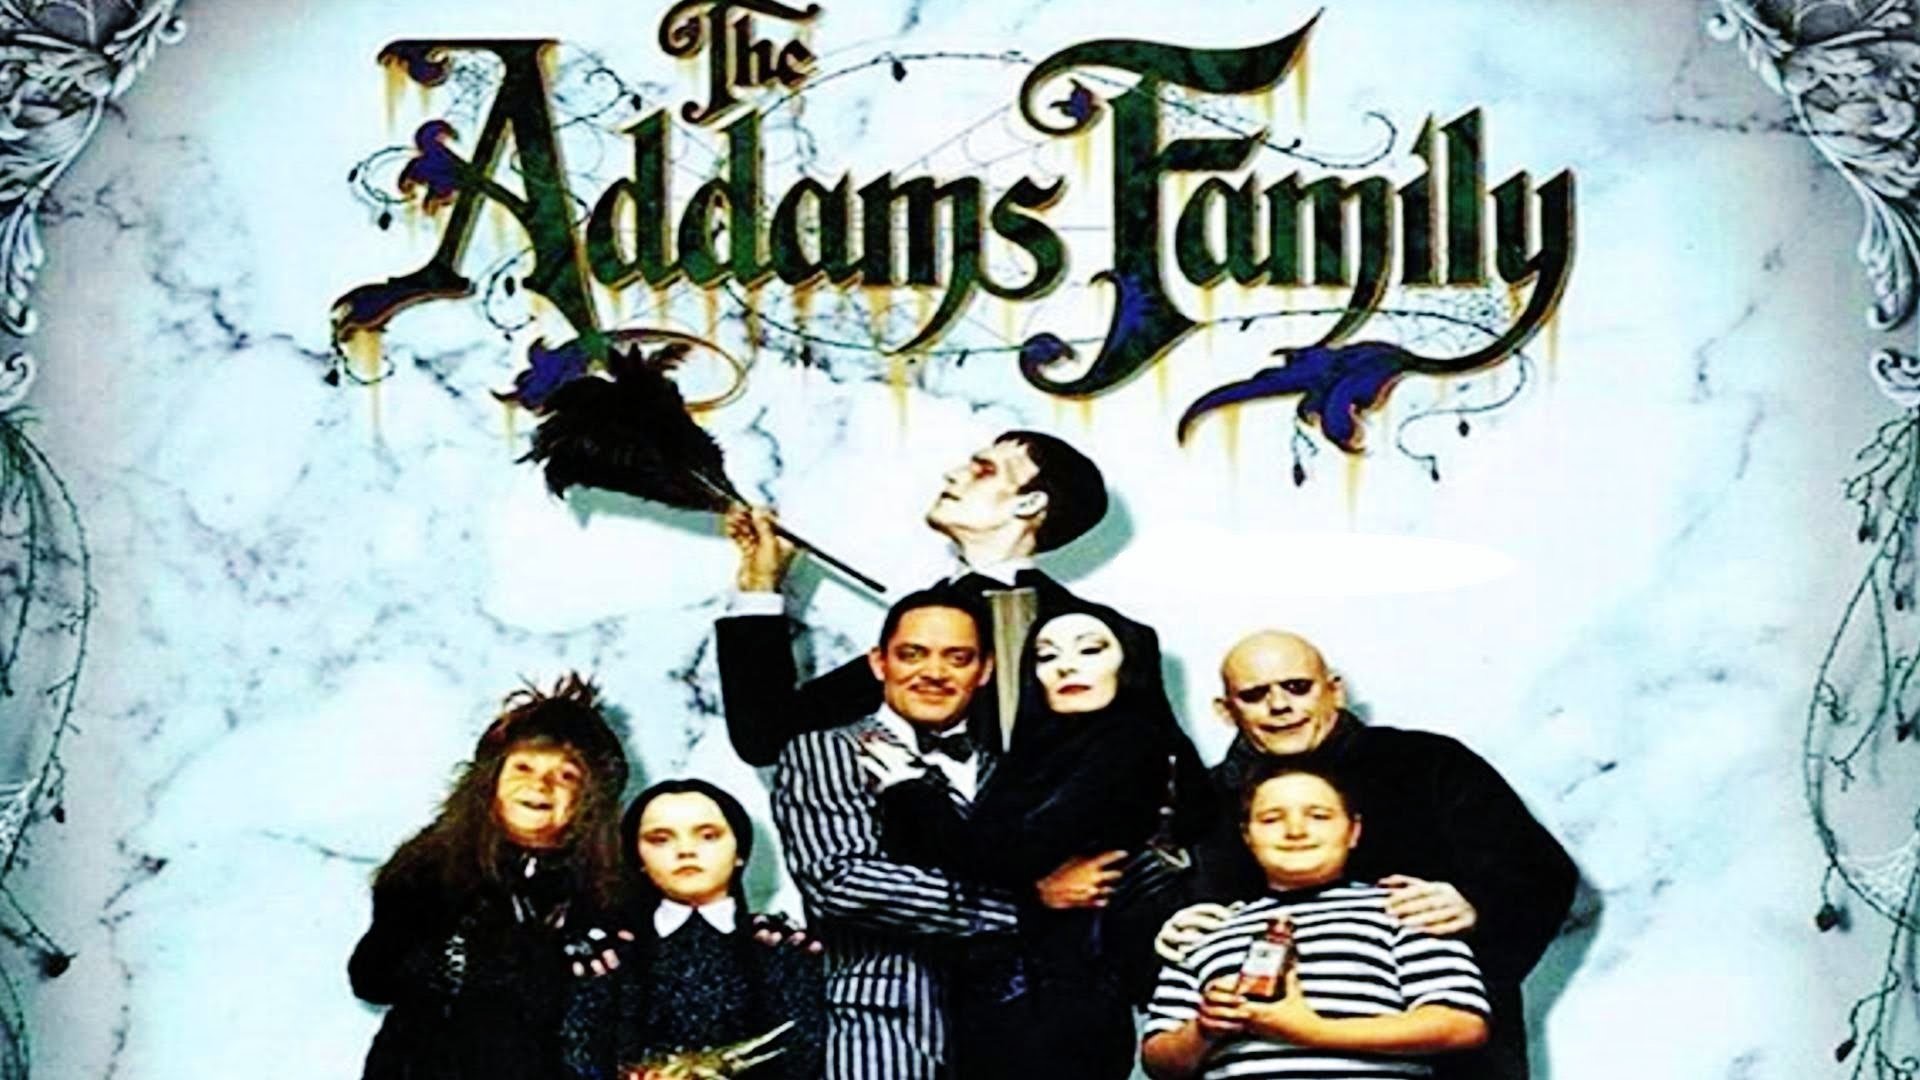 1920x1080, Addams Family Background Pictures For Desktop - Addams Family Poster 1991 - HD Wallpaper 